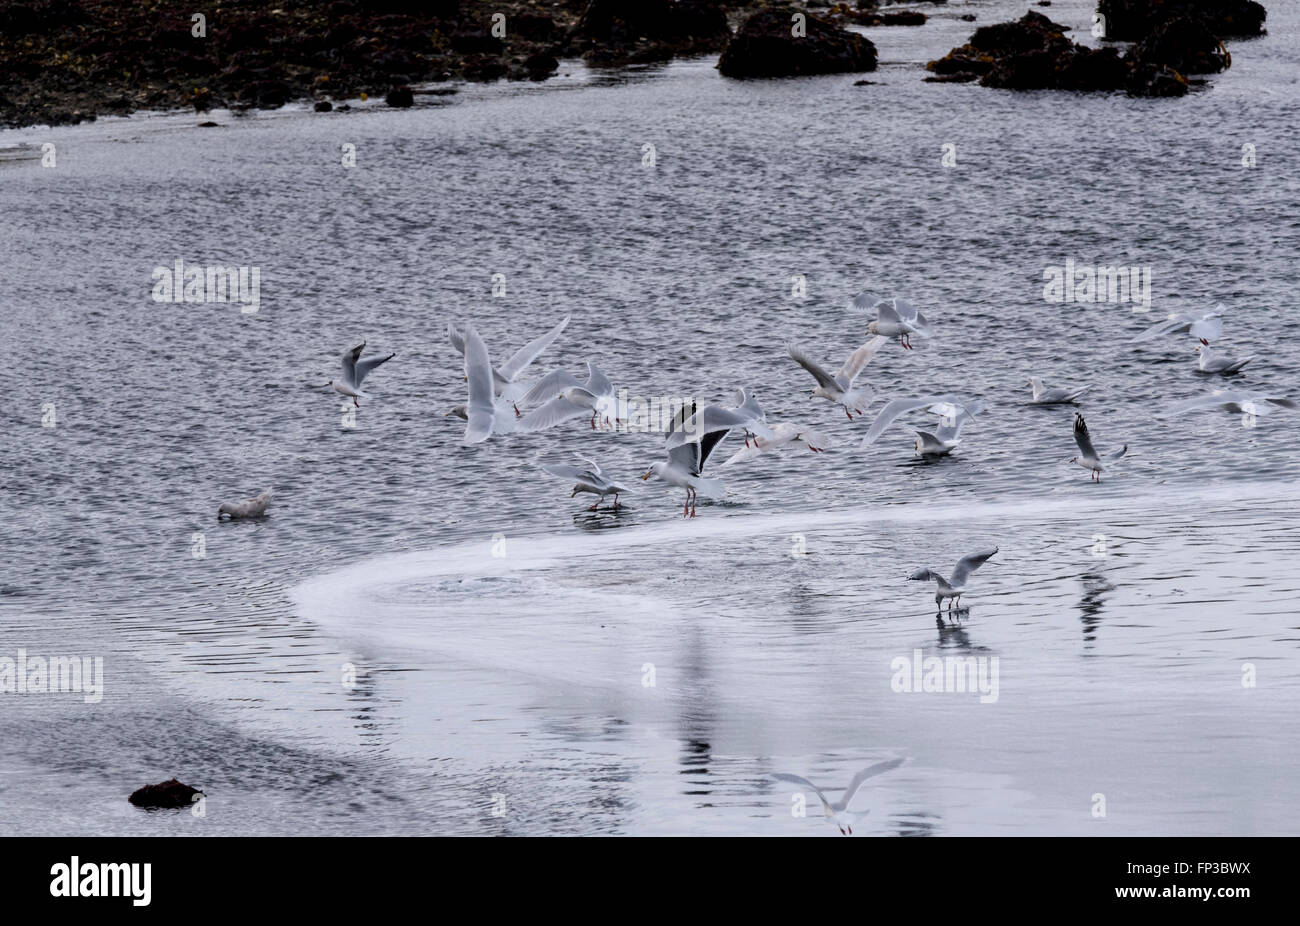 A flock of mixed gulls but with the focus on a Great Black-backed Gull taken at Stykkisholmur, Iceland Stock Photo